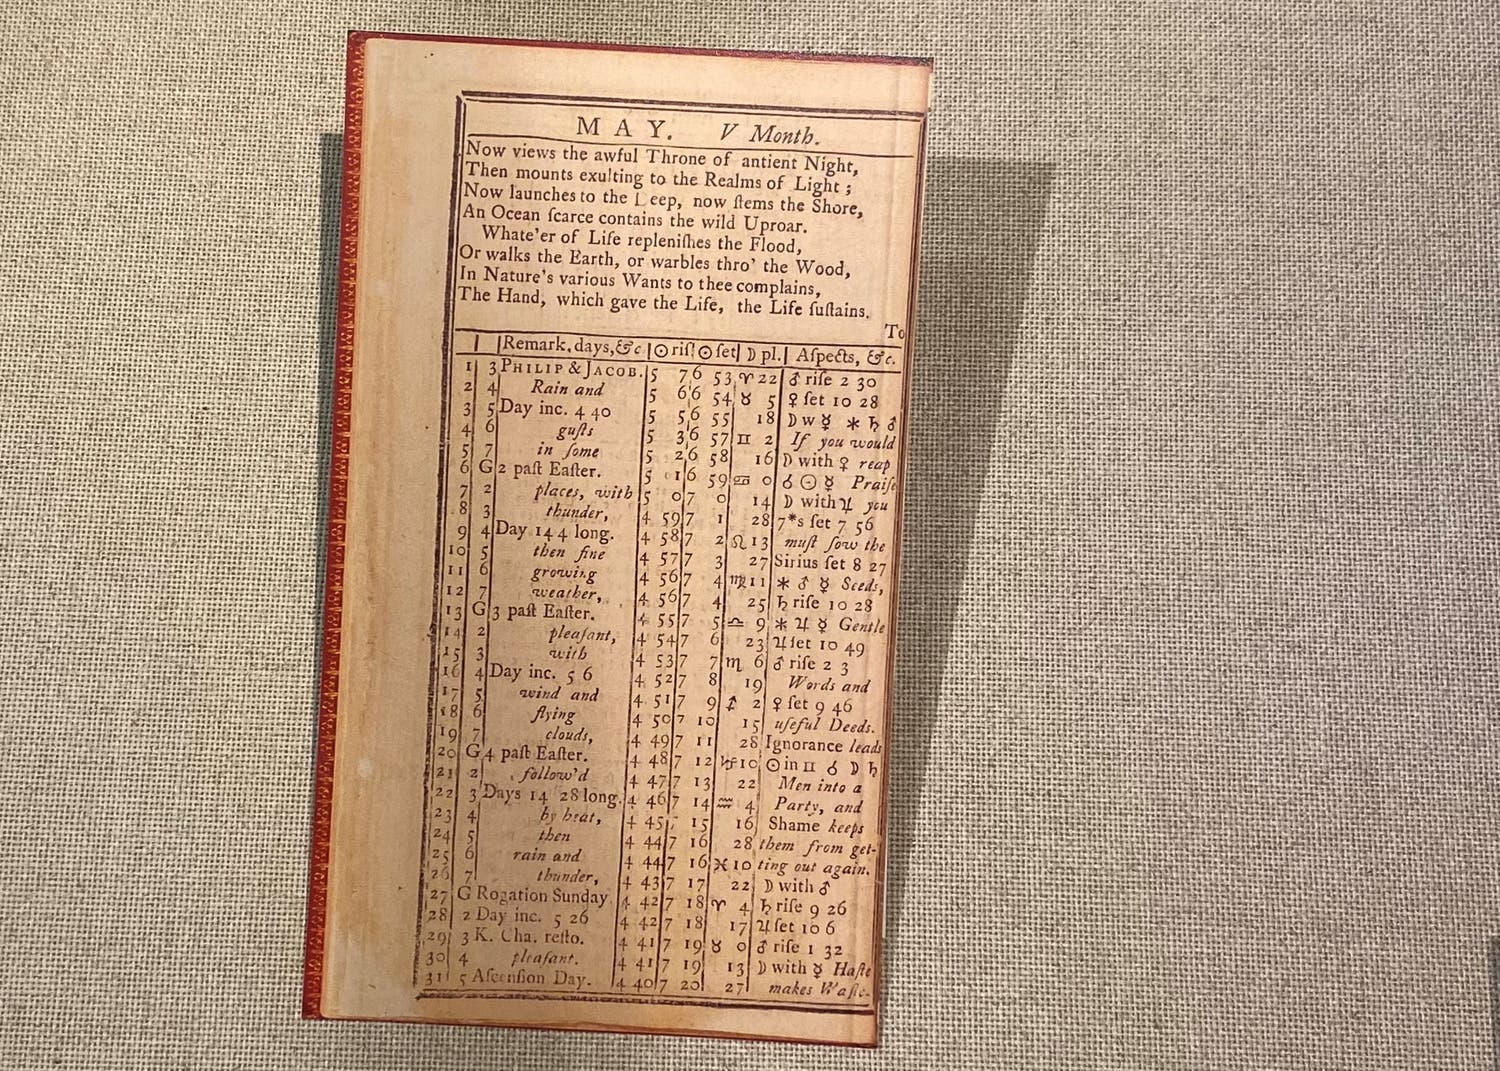 Reproduction of a page from Benjamin Franklin's Poor Richard's Almanack.